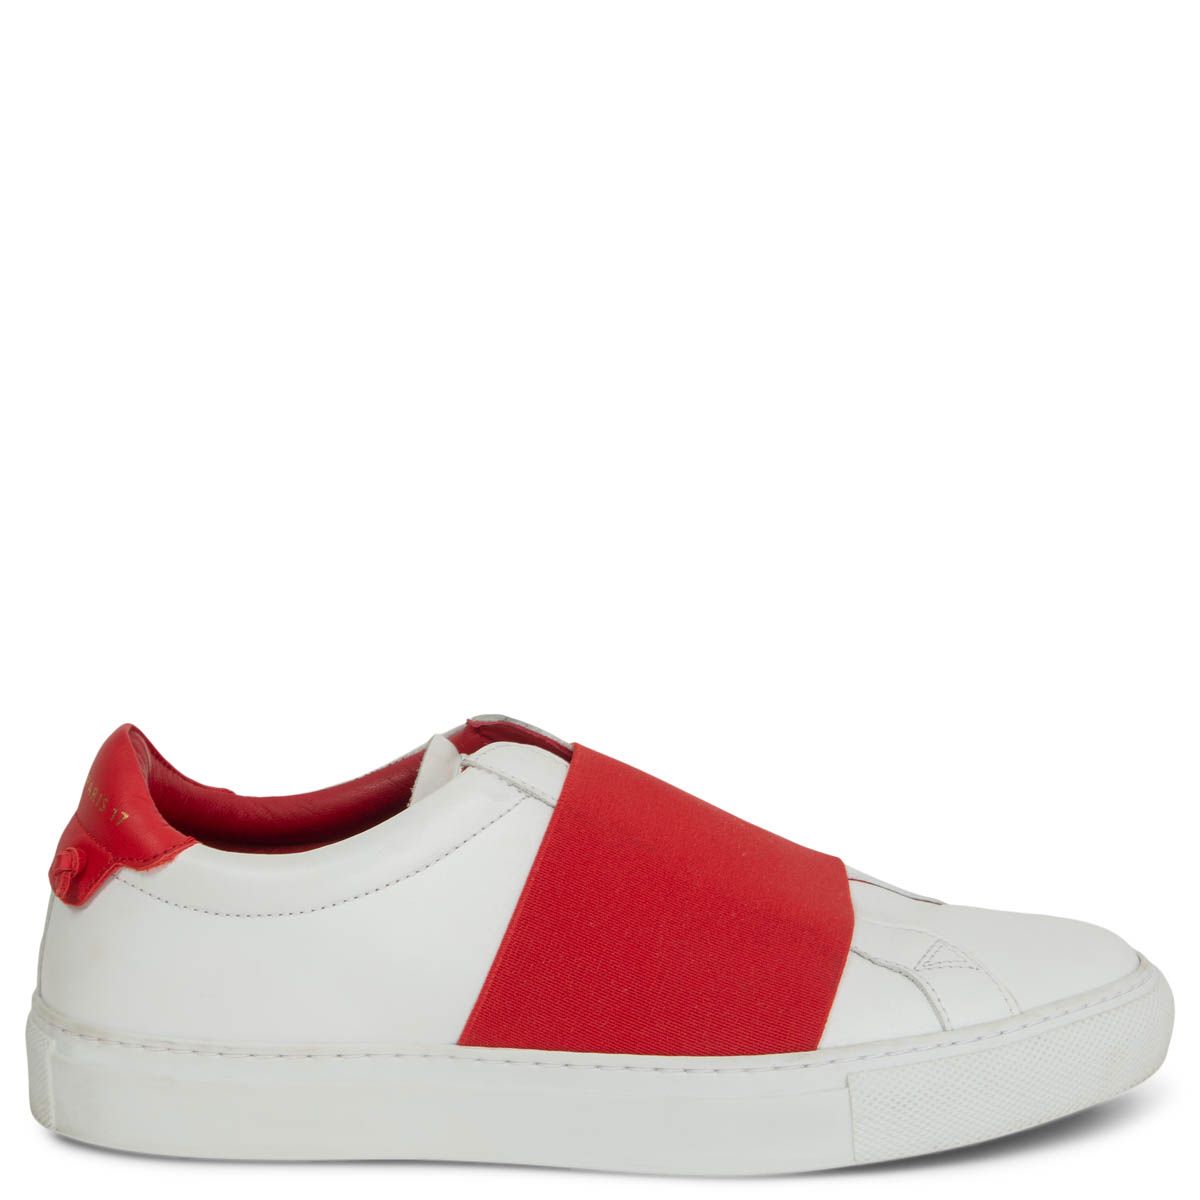 Givenchy Urban Street Sneakers White Red Leather